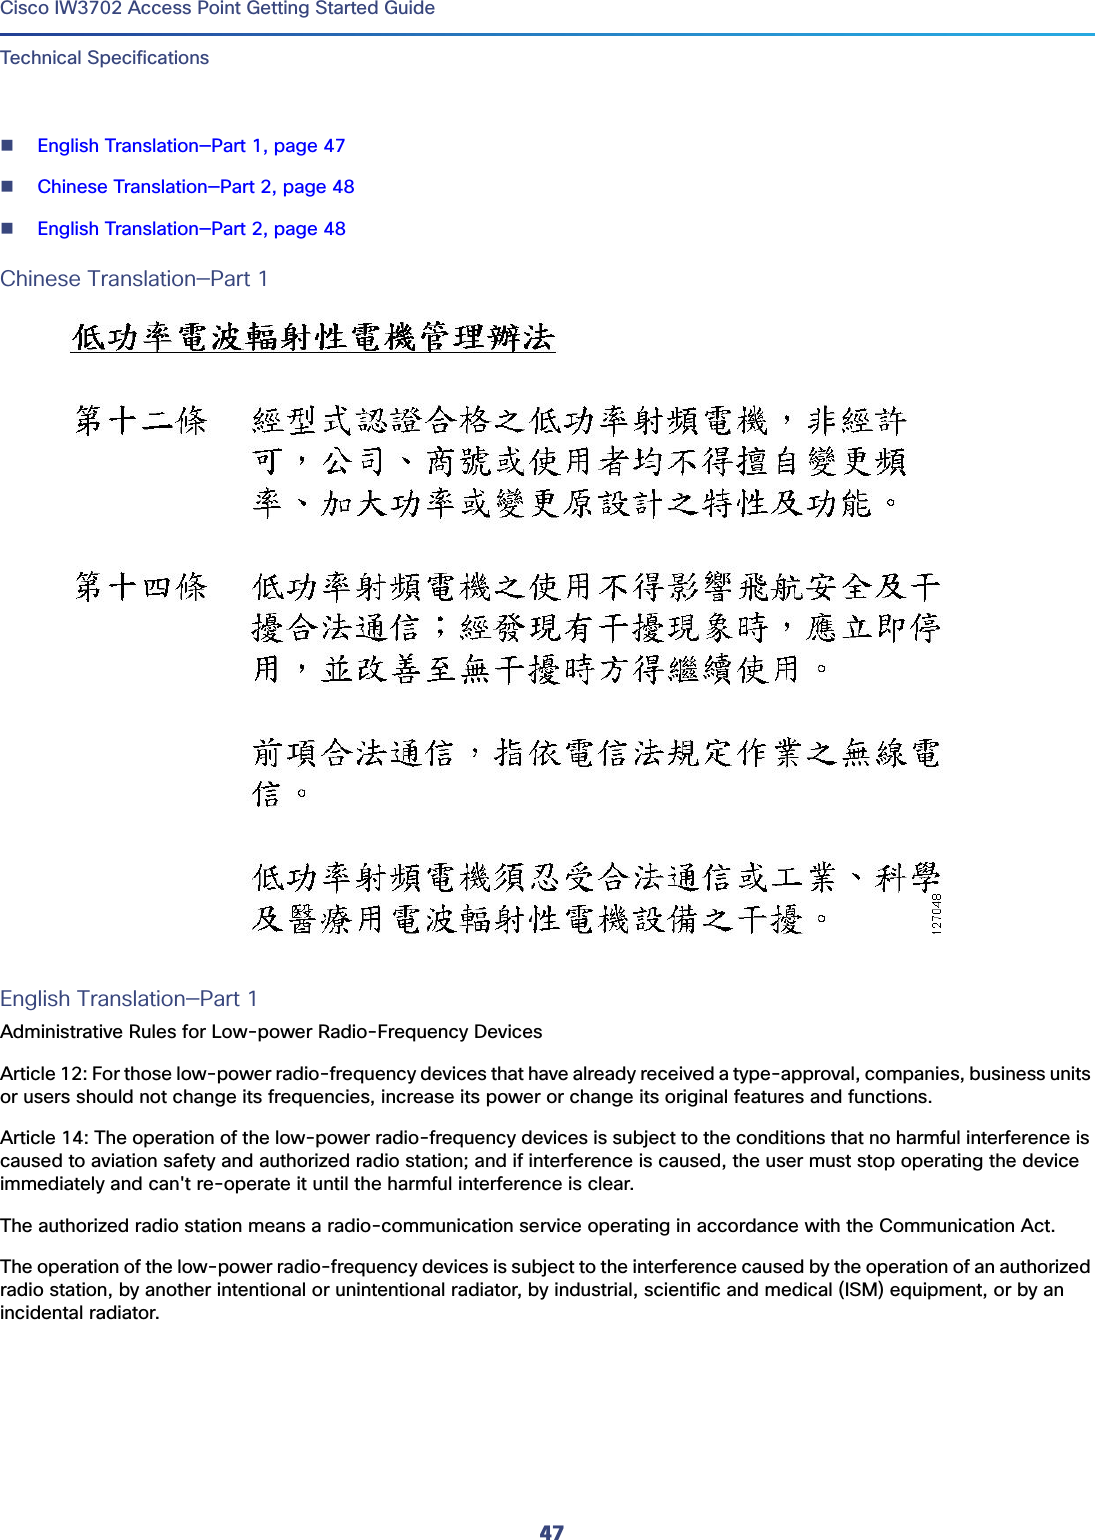 47 Cisco IW3702 Access Point Getting Started GuideTechnical SpecificationsEnglish Translation—Part 1, page 47Chinese Translation—Part 2, page 48English Translation—Part 2, page 48Chinese Translation—Part 1English Translation—Part 1Administrative Rules for Low-power Radio-Frequency DevicesArticle 12: For those low-power radio-frequency devices that have already received a type-approval, companies, business units or users should not change its frequencies, increase its power or change its original features and functions.Article 14: The operation of the low-power radio-frequency devices is subject to the conditions that no harmful interference is caused to aviation safety and authorized radio station; and if interference is caused, the user must stop operating the device immediately and can&apos;t re-operate it until the harmful interference is clear.The authorized radio station means a radio-communication service operating in accordance with the Communication Act.The operation of the low-power radio-frequency devices is subject to the interference caused by the operation of an authorized radio station, by another intentional or unintentional radiator, by industrial, scientific and medical (ISM) equipment, or by an incidental radiator.